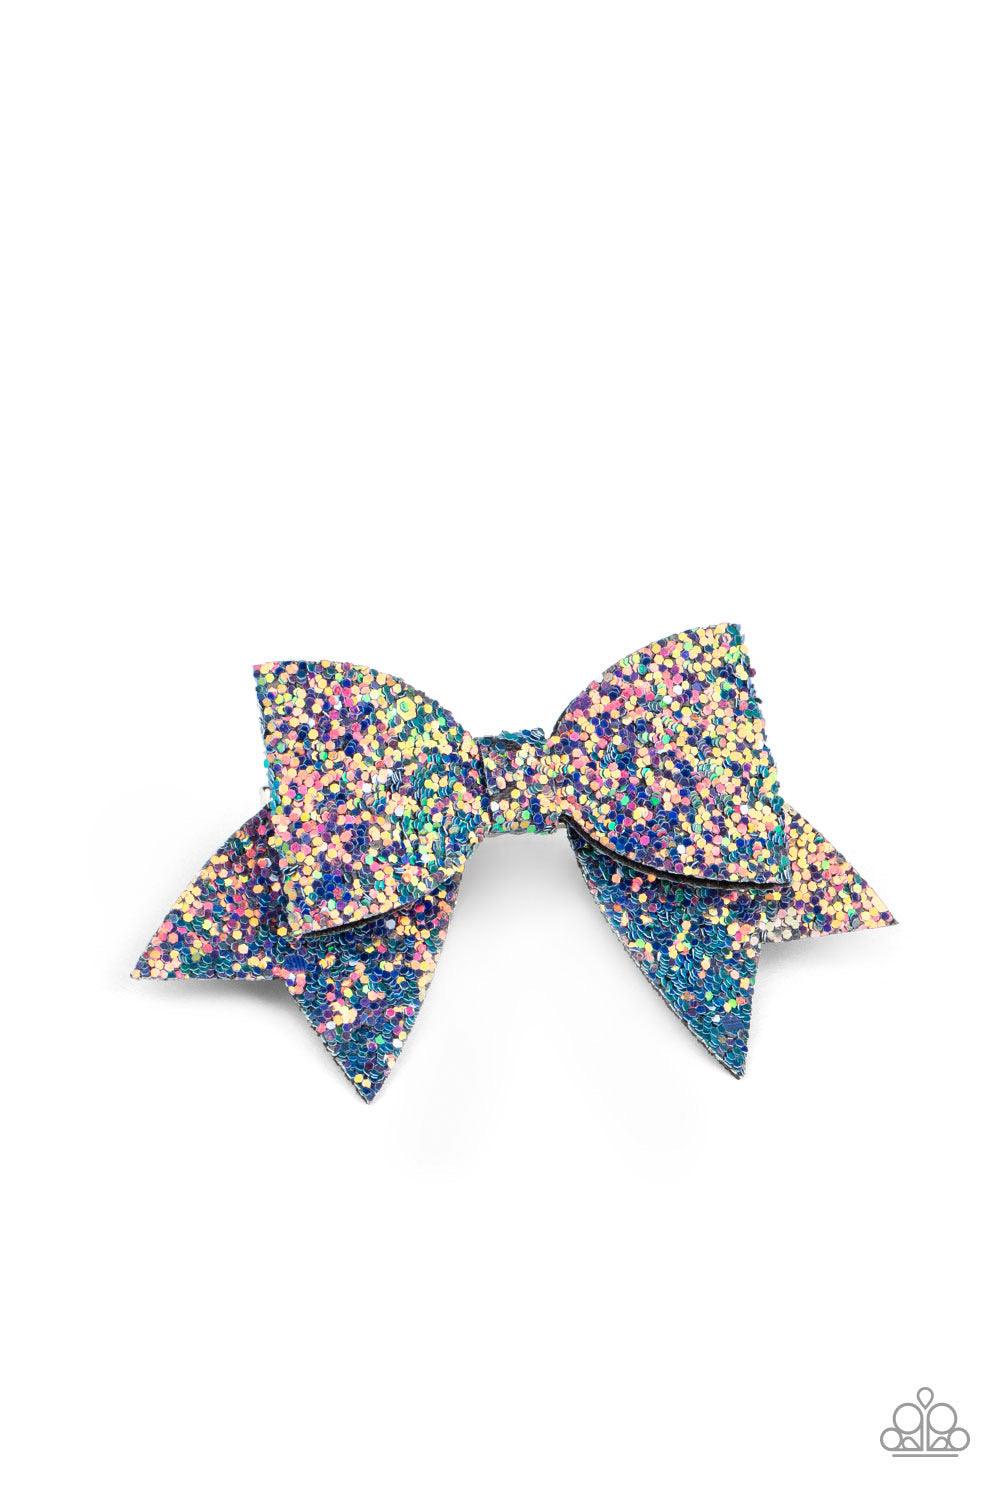 Paparazzi Accessories Confetti Princess - Multi Dusted in multicolored sequins, glittery leather pieces delicately knot into a dainty bow. Features a standard hair clip on the back. Sold as one individual hair clip. Hair Accessories